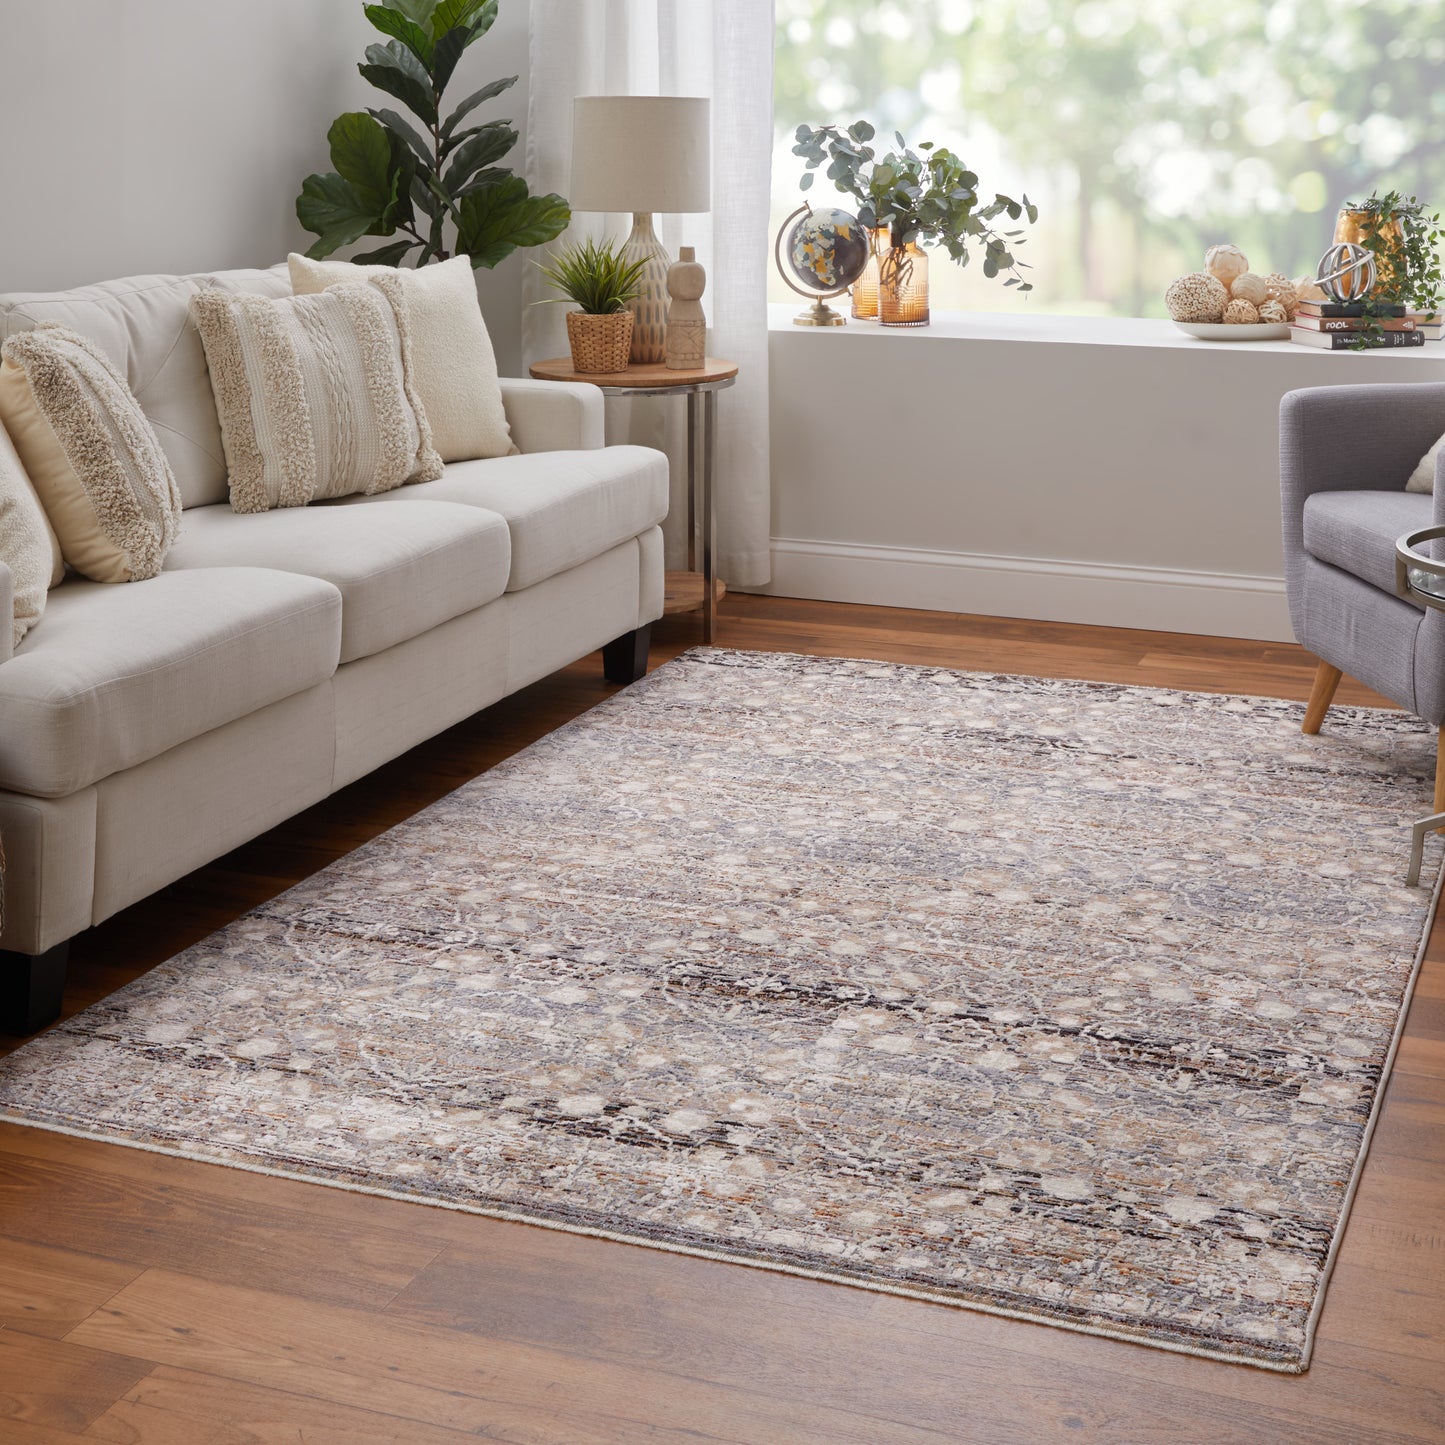 Feizy Caprio 3961F Stone  Transitional/Bohemian & Eclect Machine Woven Rug